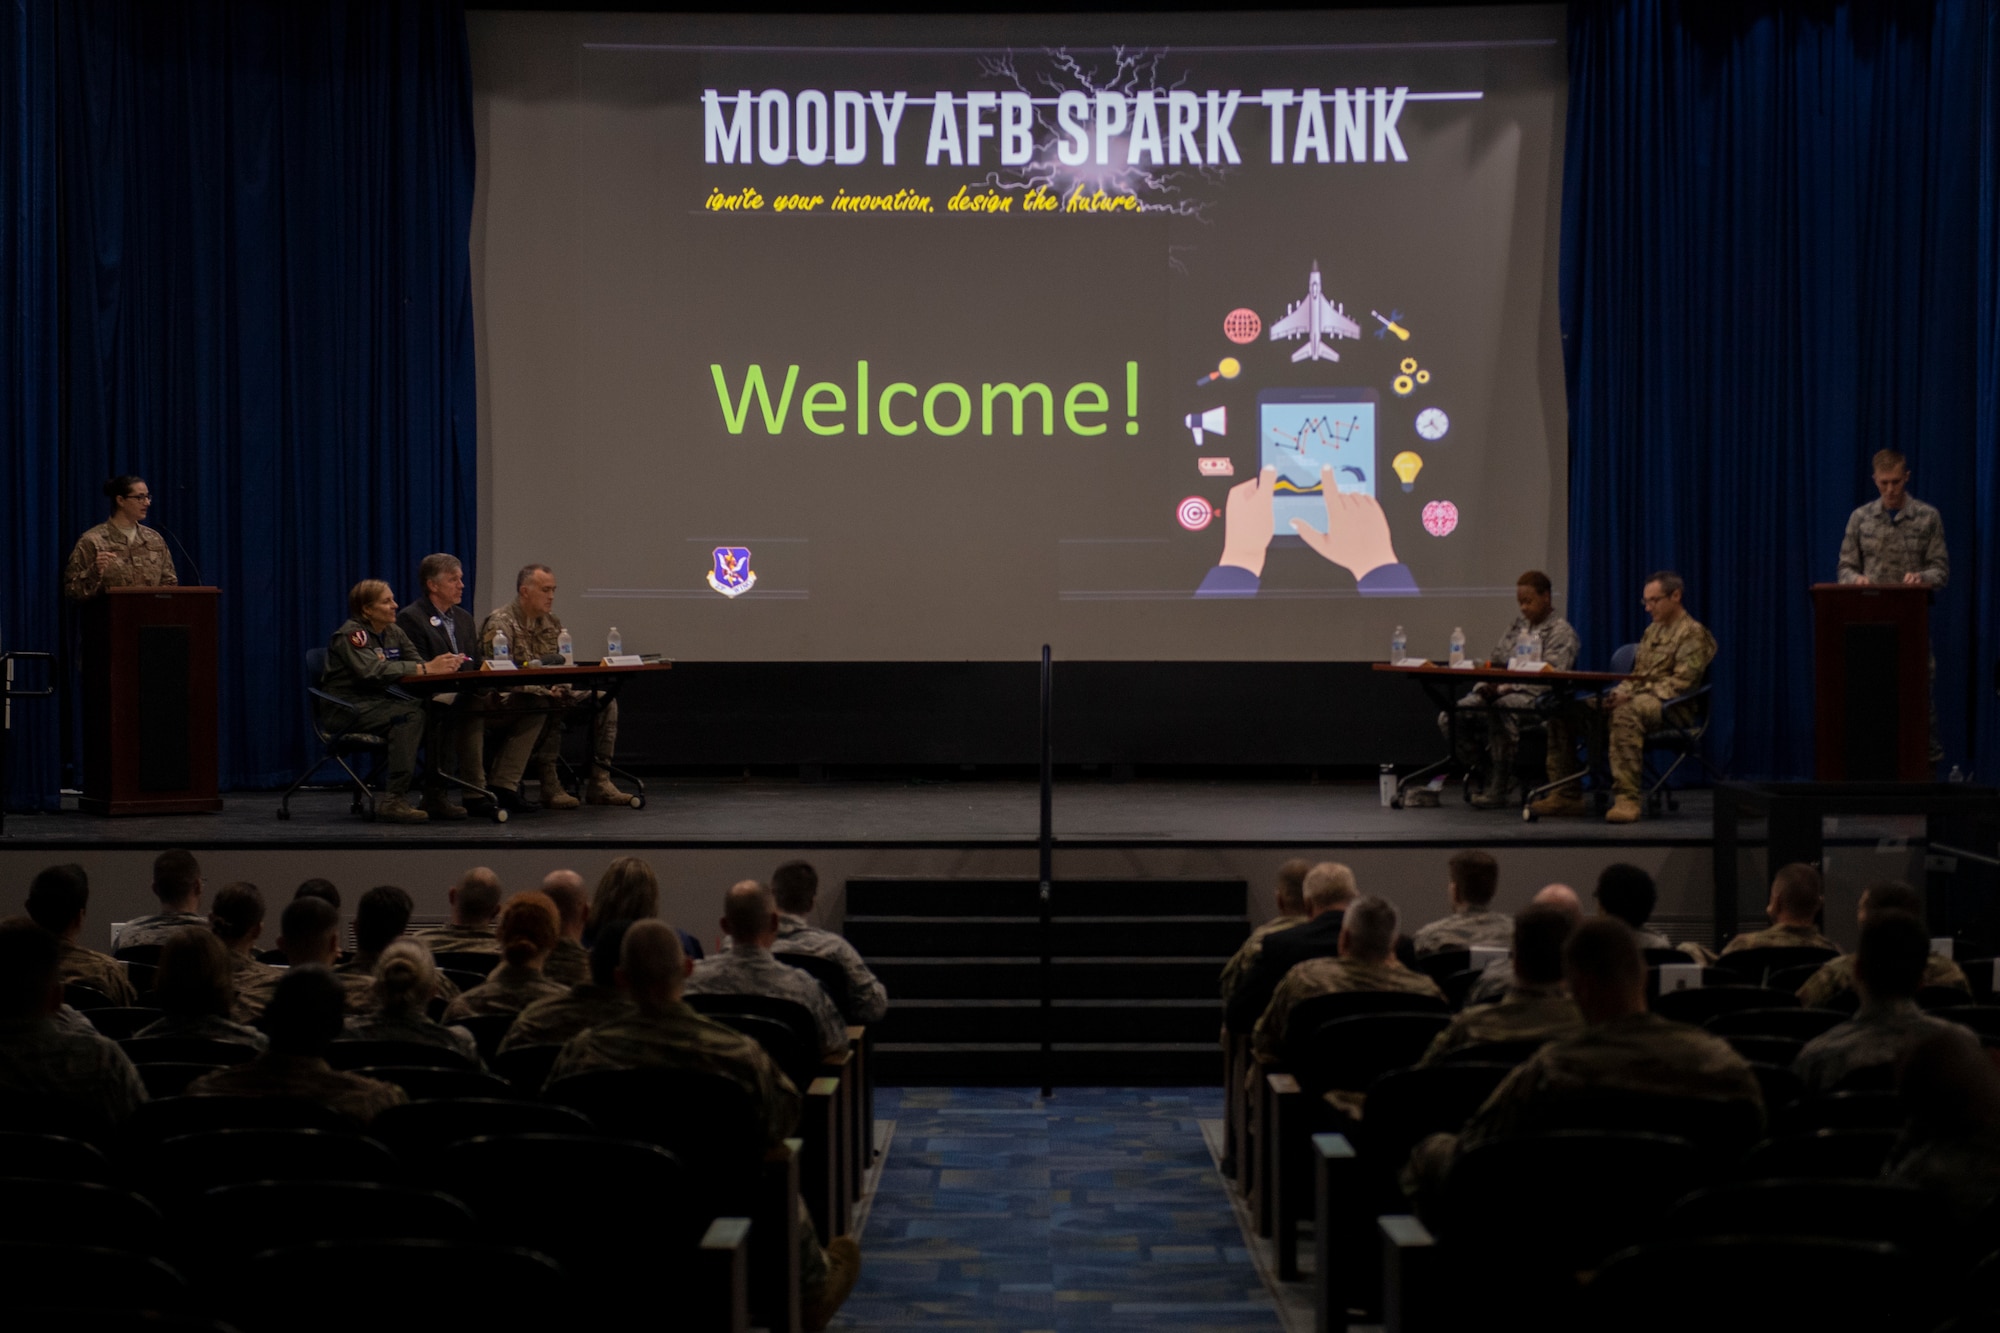 Audience members listen as the emcees introduce the judges during the second annual Moody Spark Tank competition May, 3, 2019, at Moody Air Force Base, Ga. The competition allows Airmen to showcase their ingenuity by presenting various time and money saving ideas that can benefit the Air Force. Teams were given five minutes to present their ideas, followed by four minutes of questions from the judges and culminating in a final decision round to announce the winners. (U.S. Air Force photo by Airman 1st Class Joseph P. Leveille)